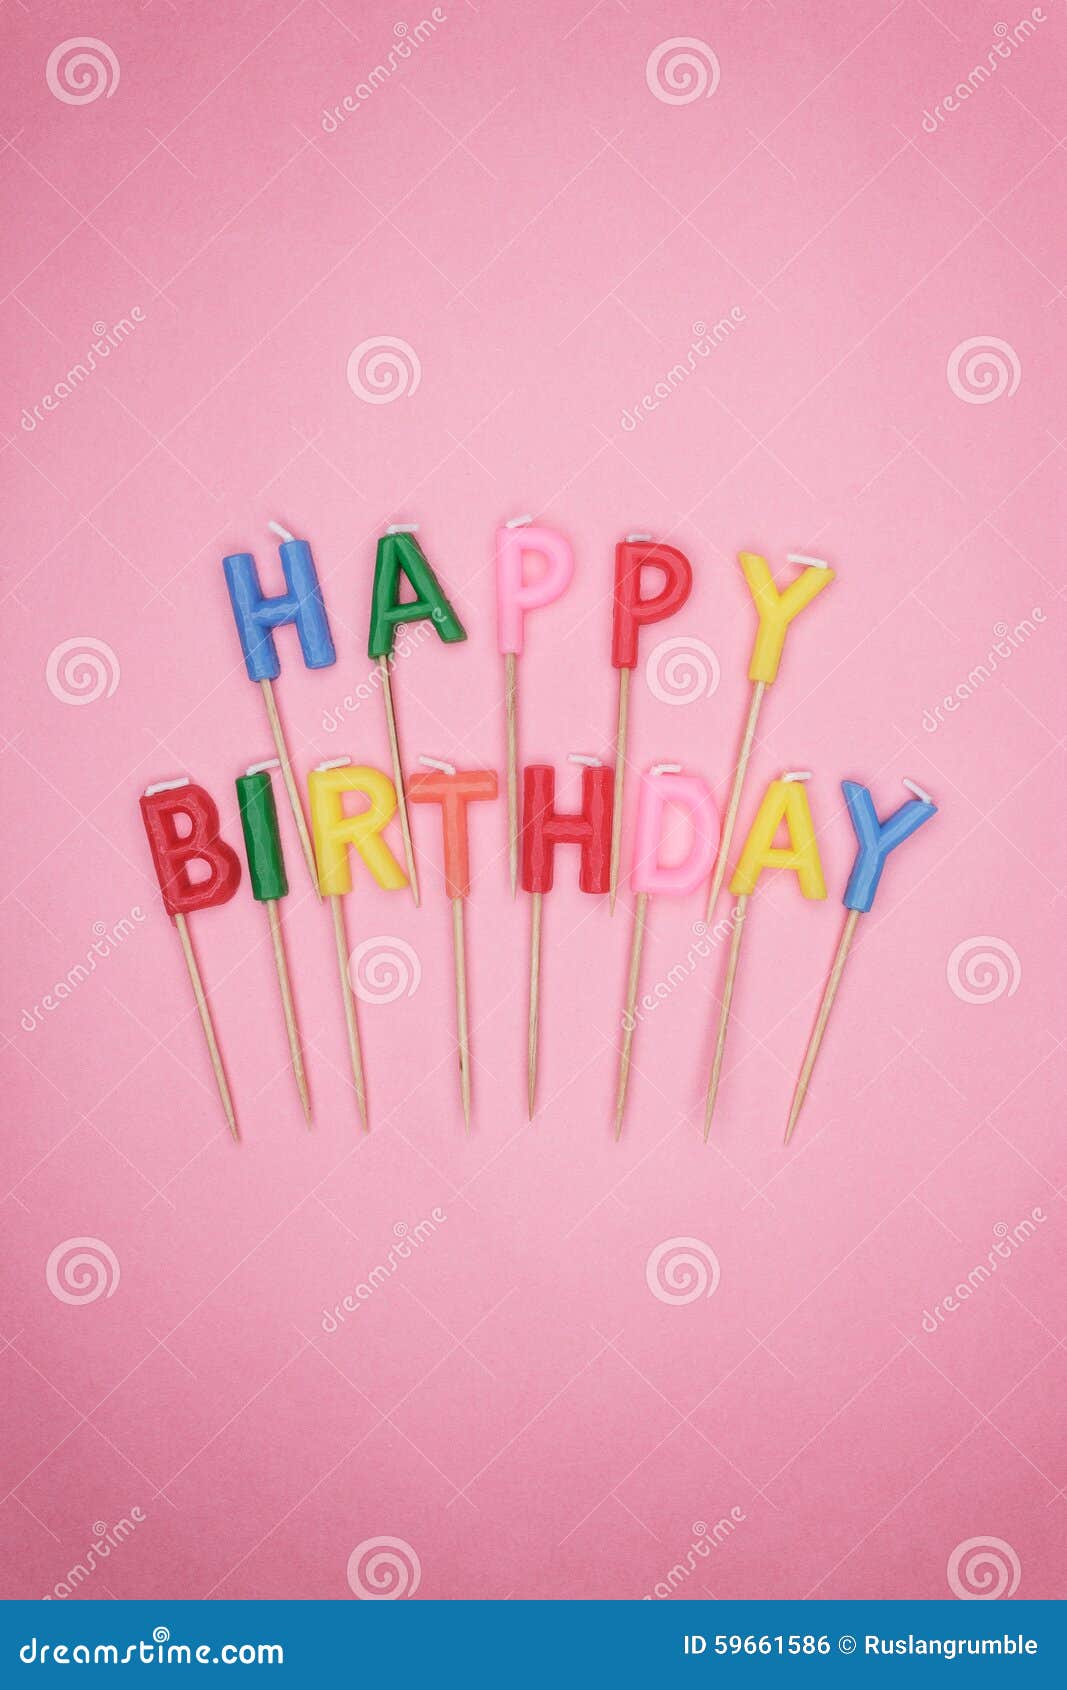 Letter-shaped Happy Birthday Candles on Pink Stock Photo - Image of ...